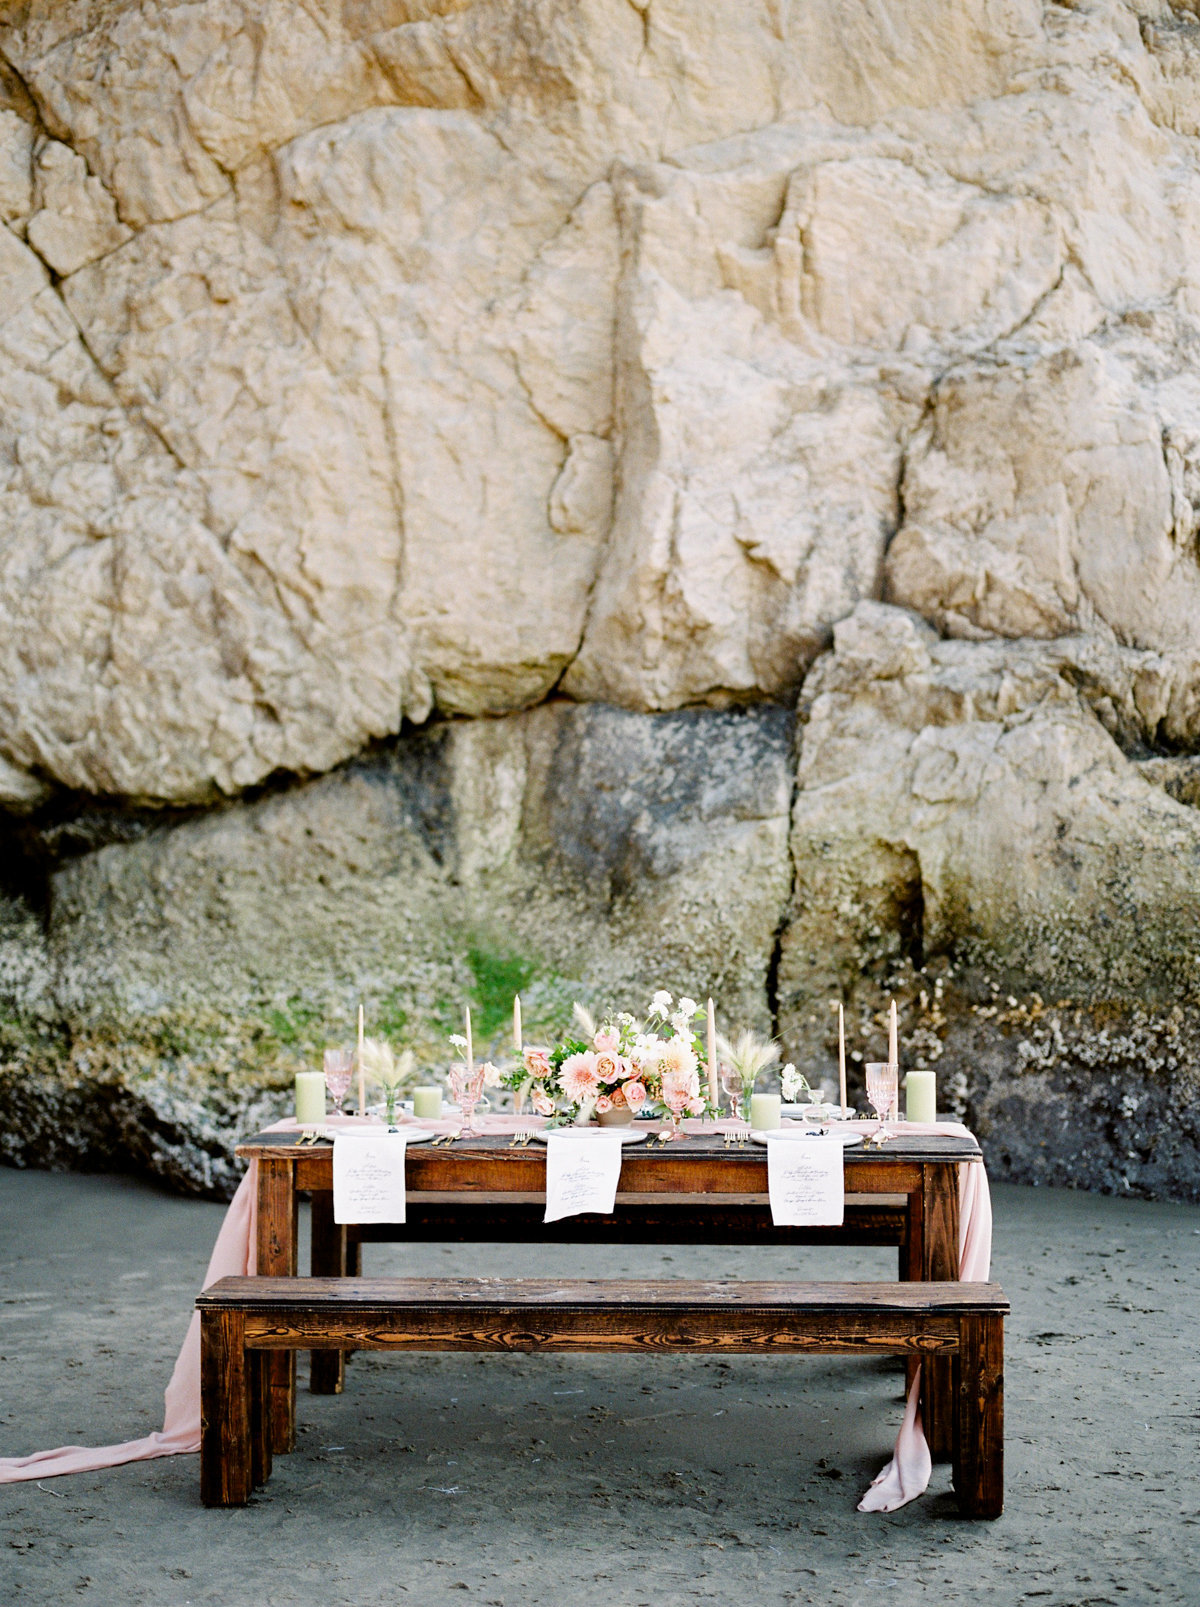 cannon beach table scape pink